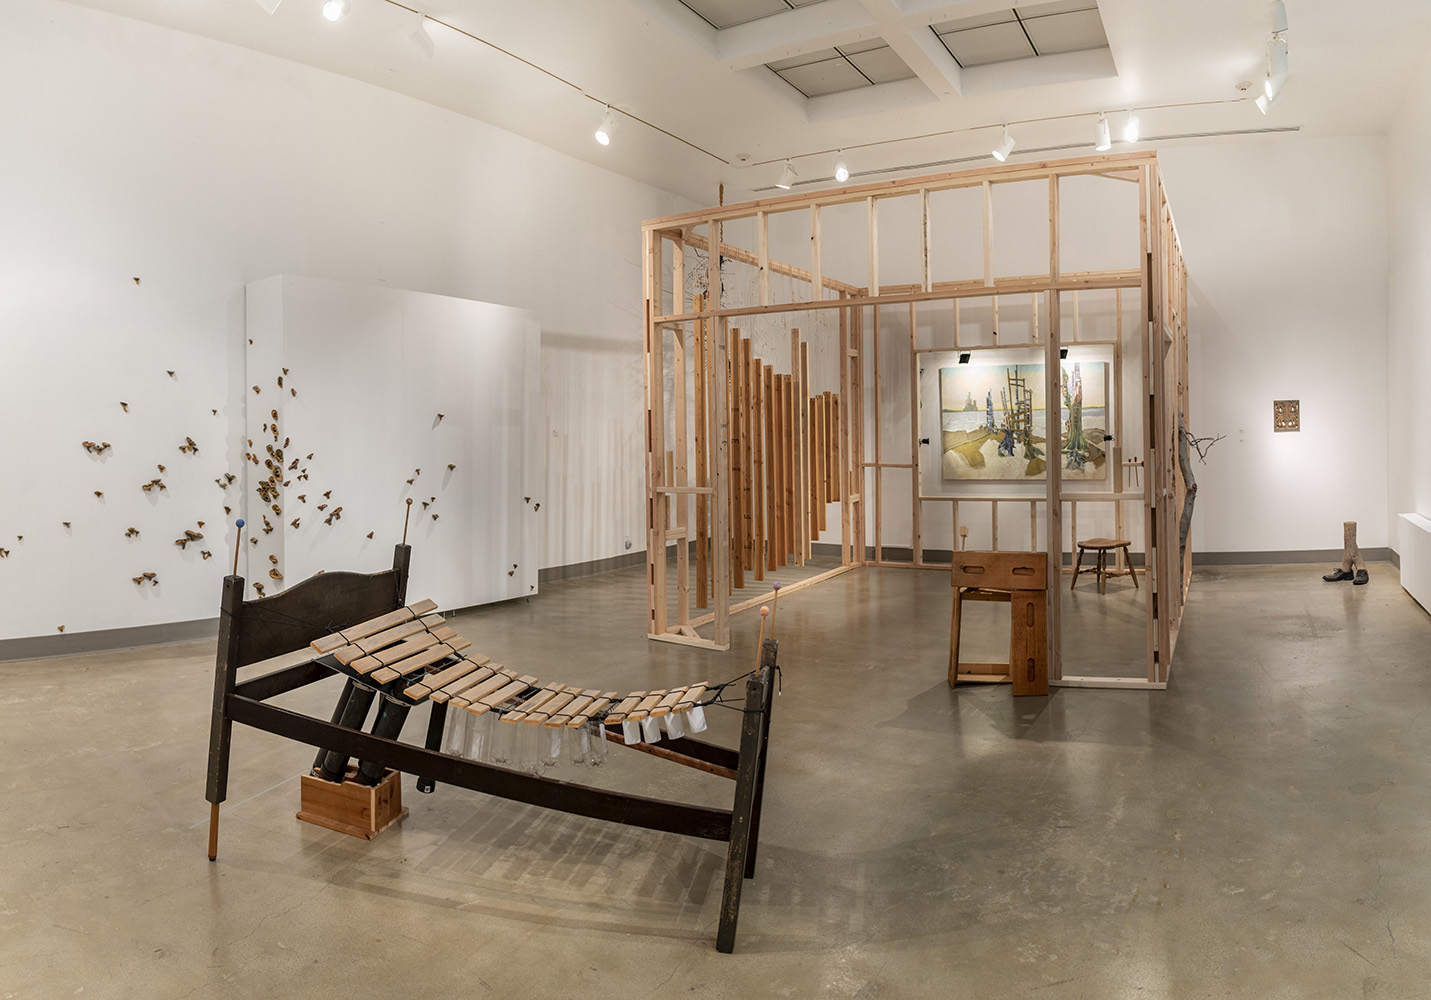 Installation View, Front of Gallery, St. Broxville Wood: Into the Thicket Exhibition. Artists: Jennifer Gunlock, Hilary Norcliffe, and Katie Stubblefield